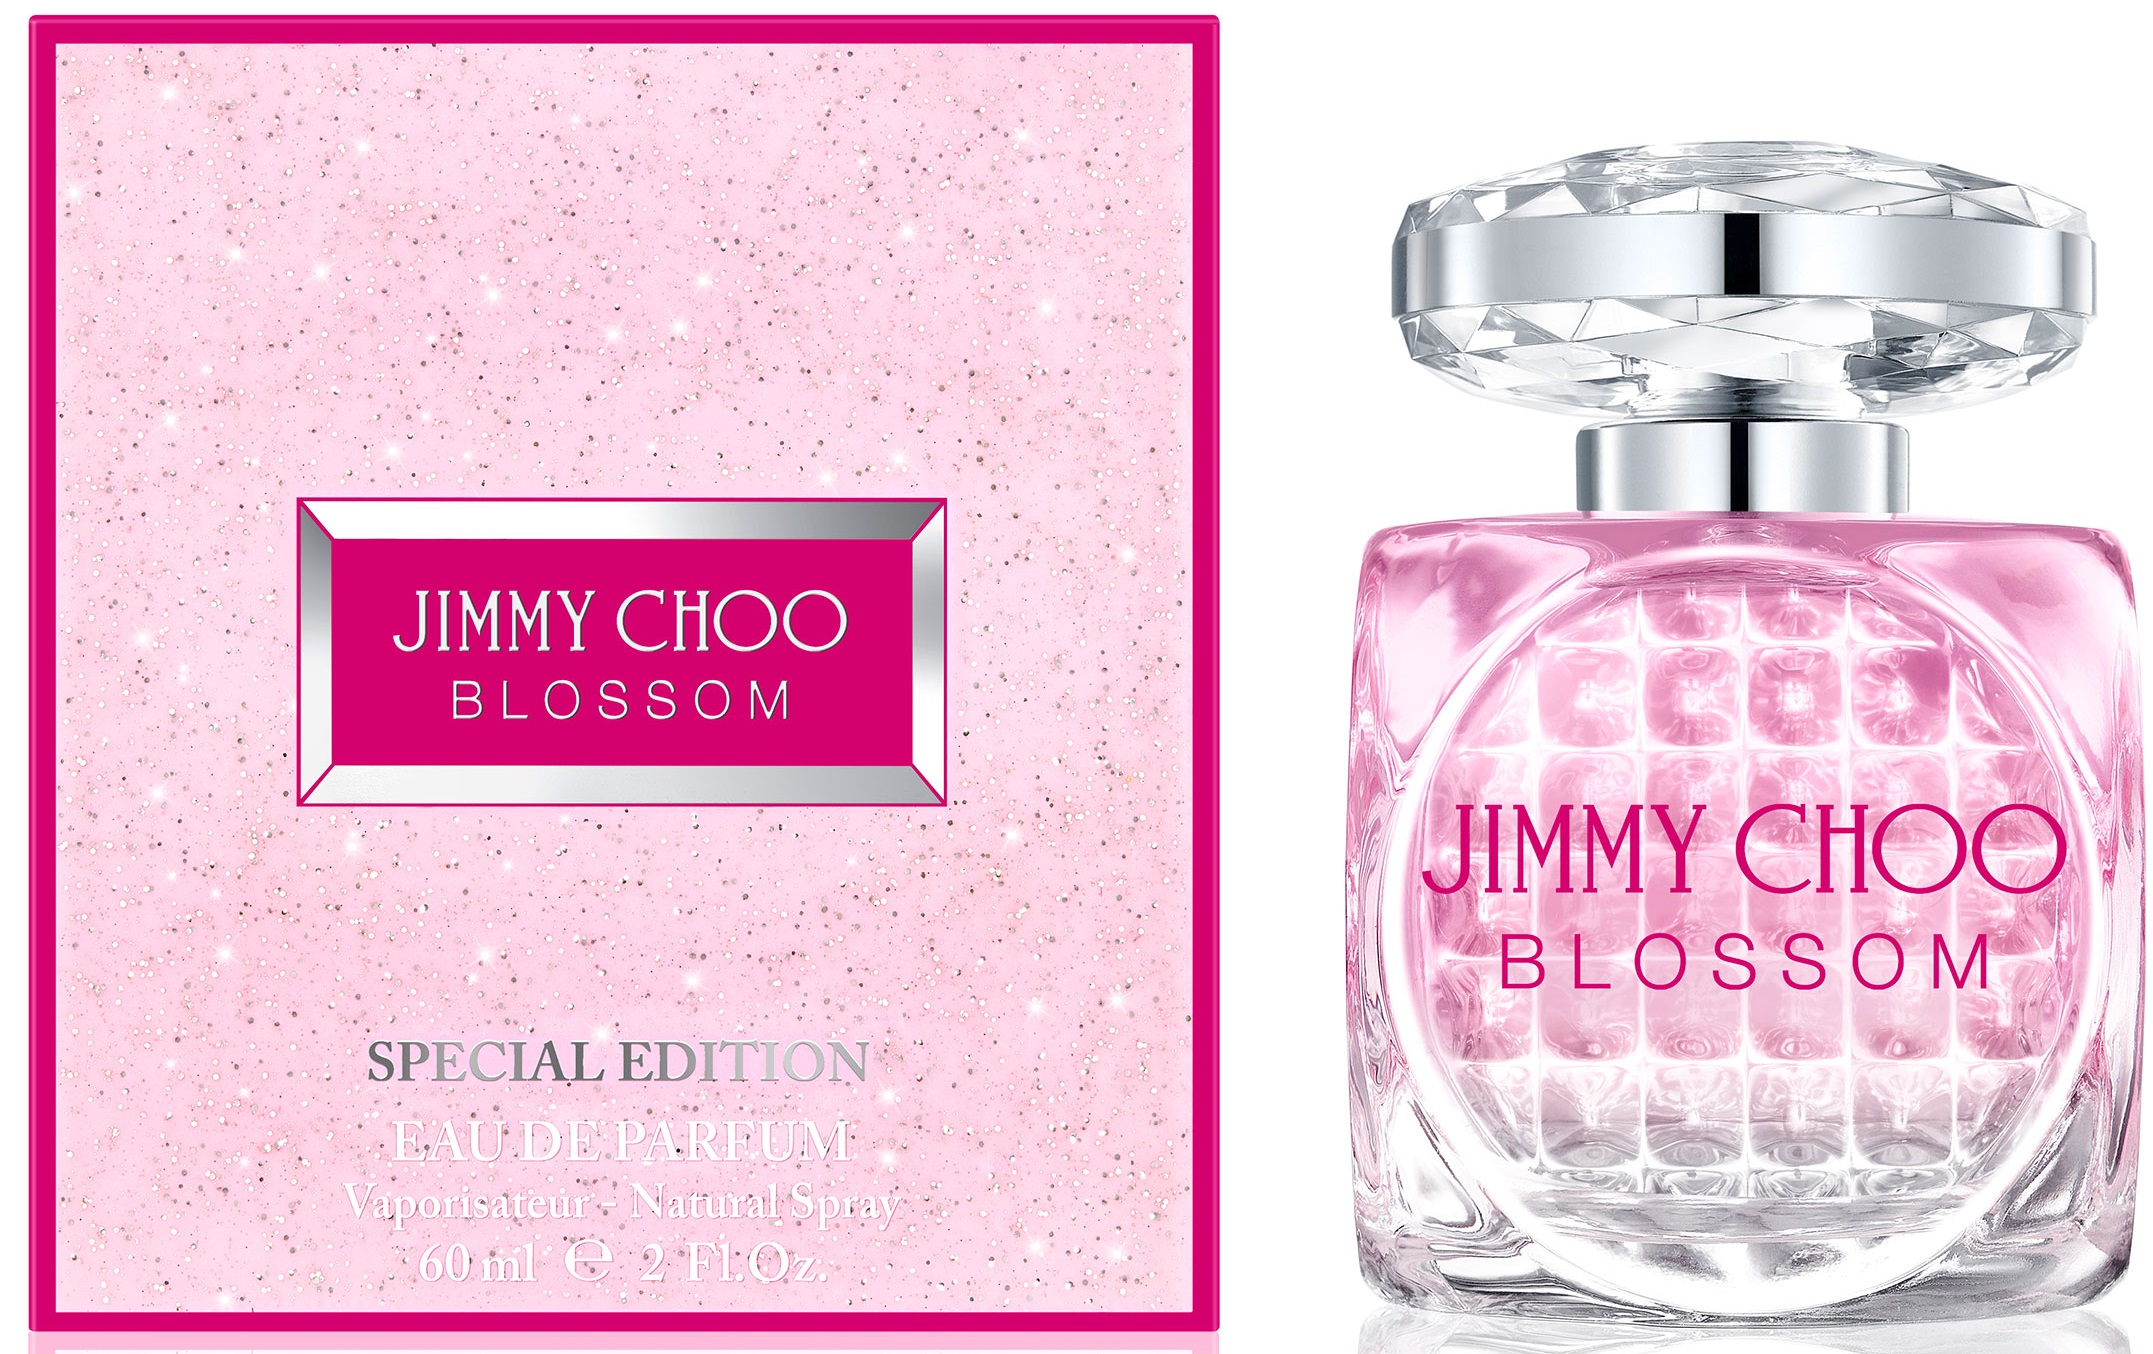 Jimmy Choo Blossom Special Edition (2019)